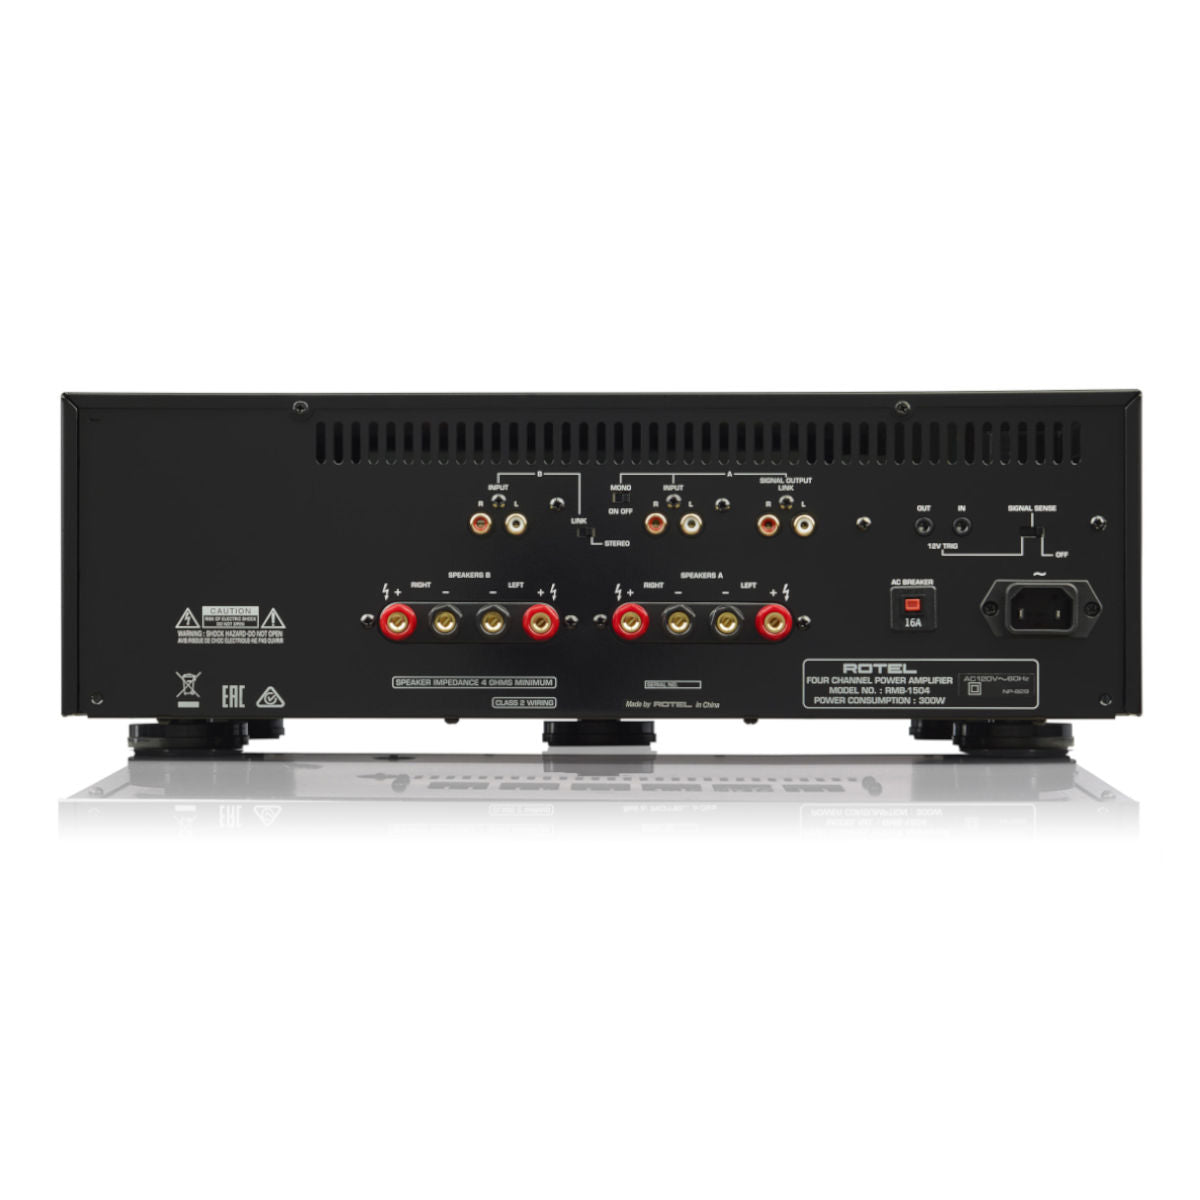 Rotel RMB-1504 4-channel Distribution Amplifier - Rear View